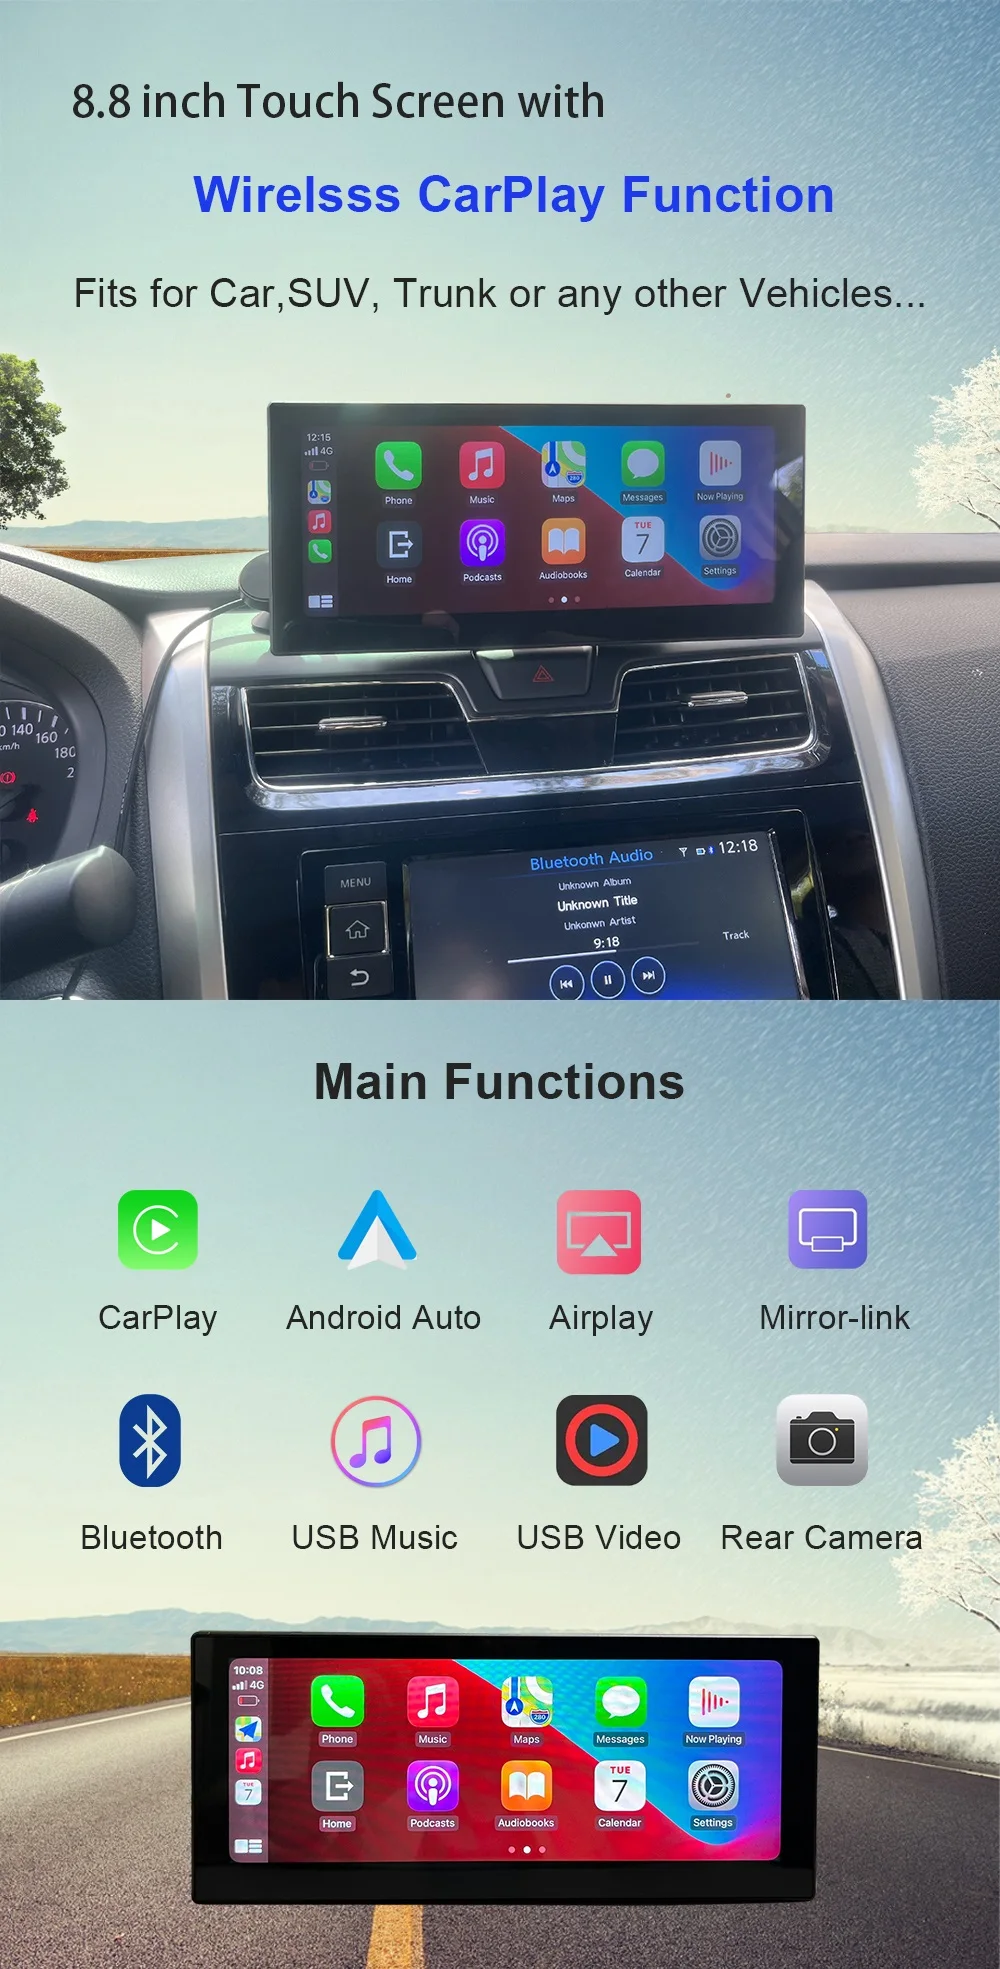 8.8 Inch Universal Wireless Carplay Display For Nissan Honda Toyota with Android Auto Mirror Link Bluetooth USB Play Rear Camera car video player bluetooth